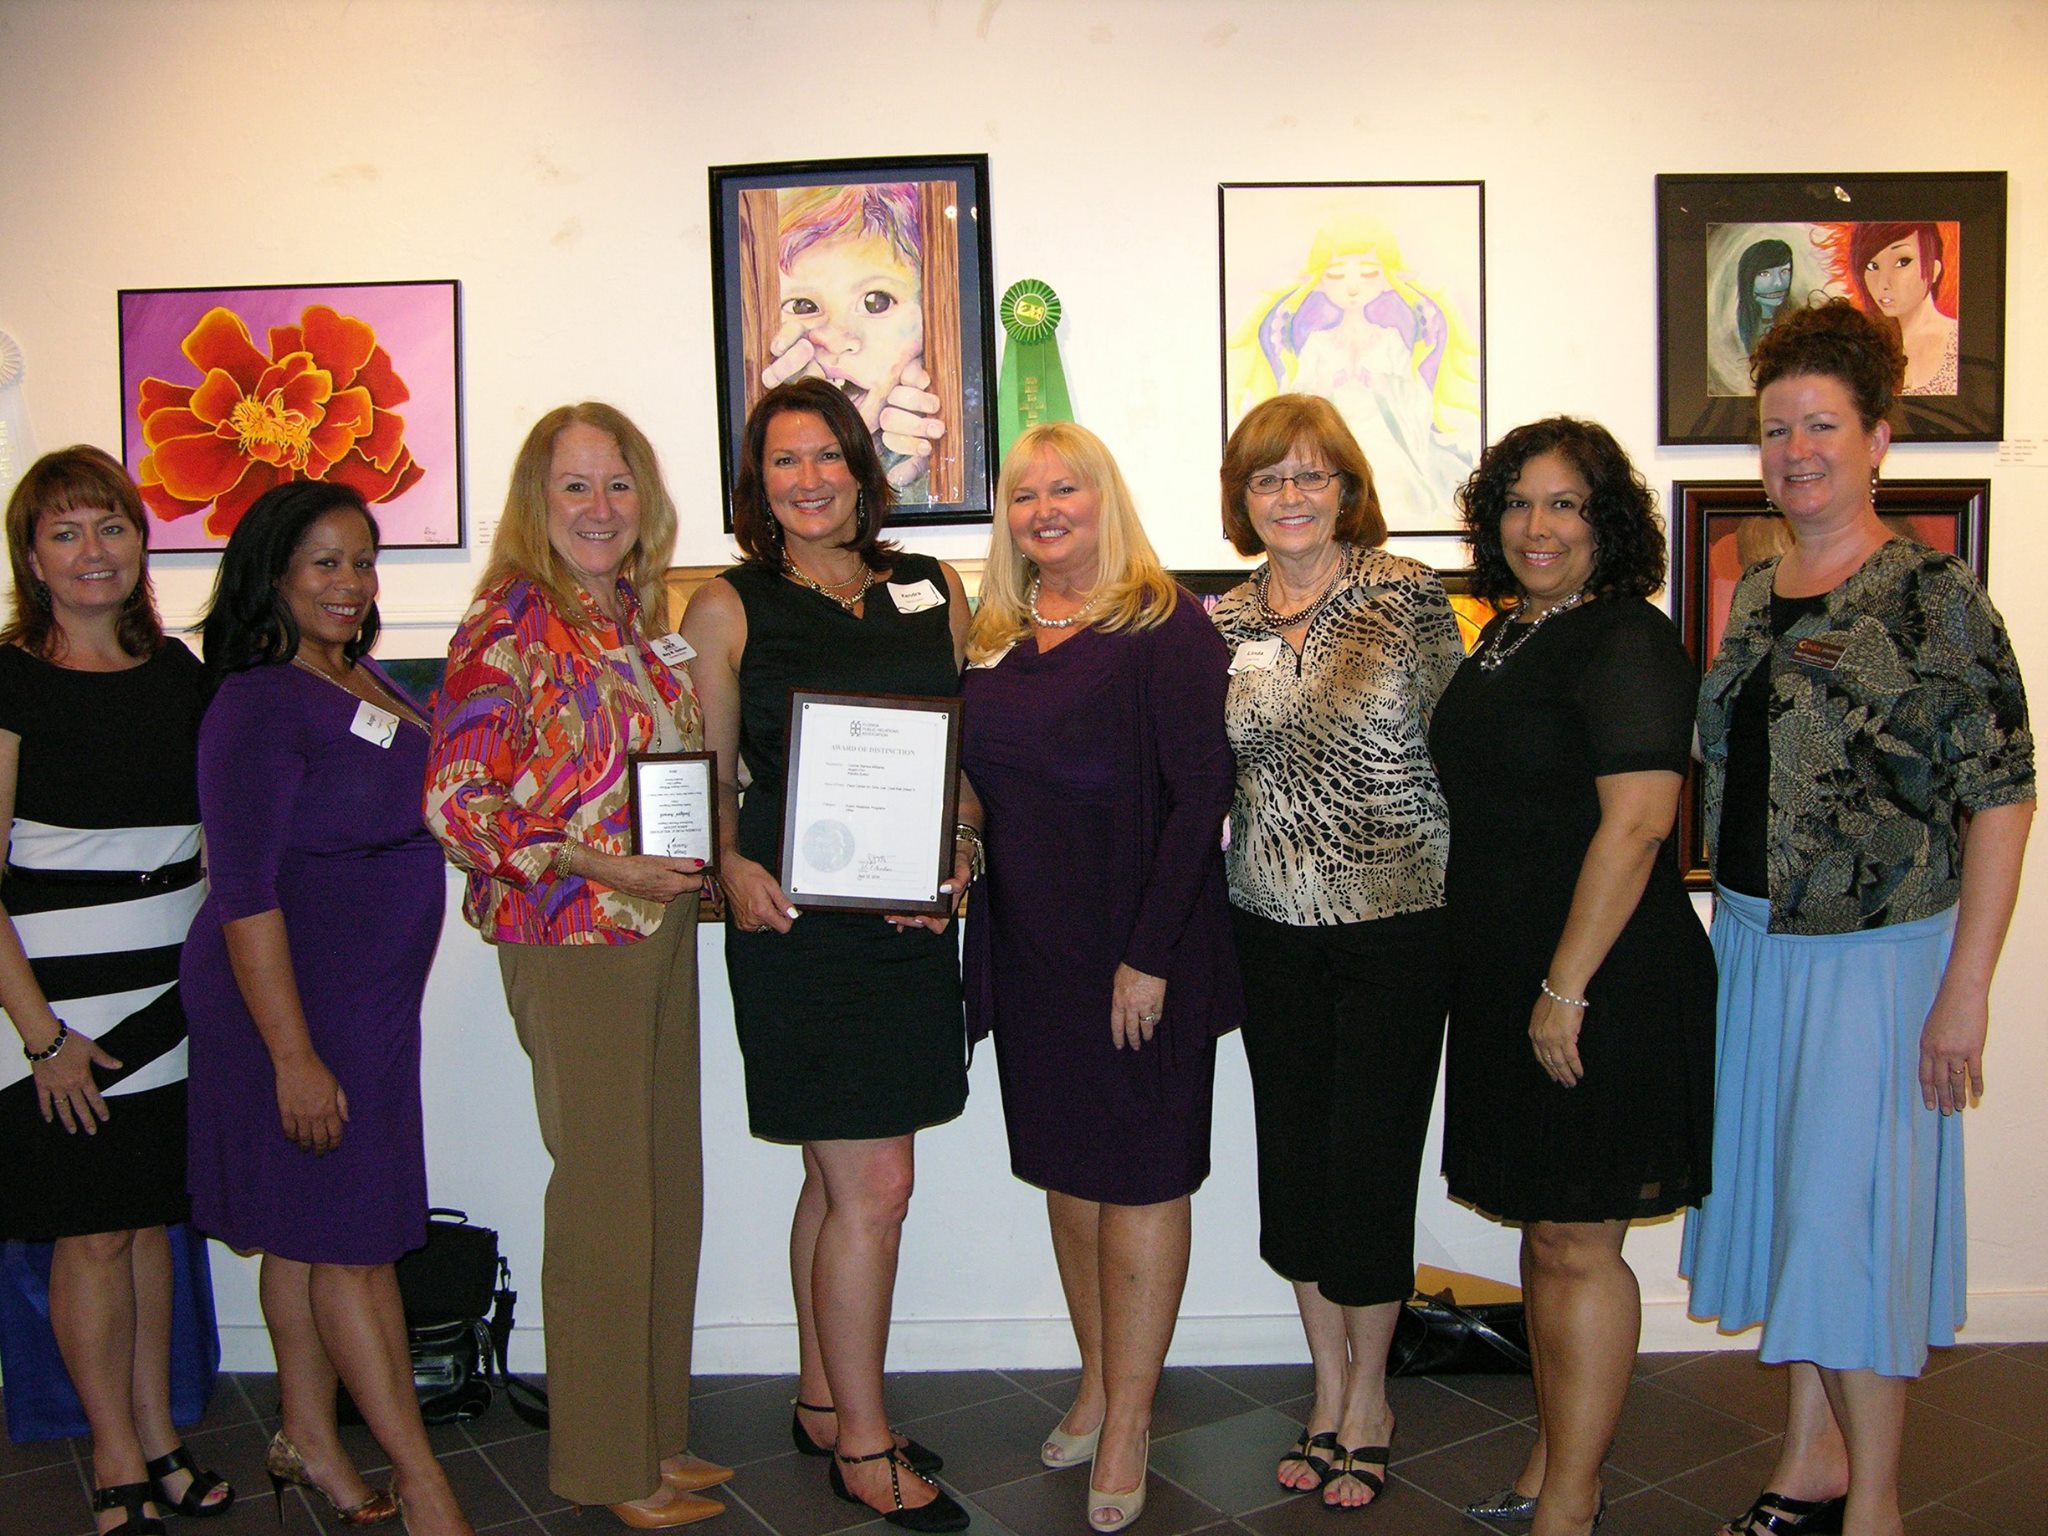 PACE Center for Girls PR Campaign Earns Two Image Awards from FPRA for Love That Dress! 5